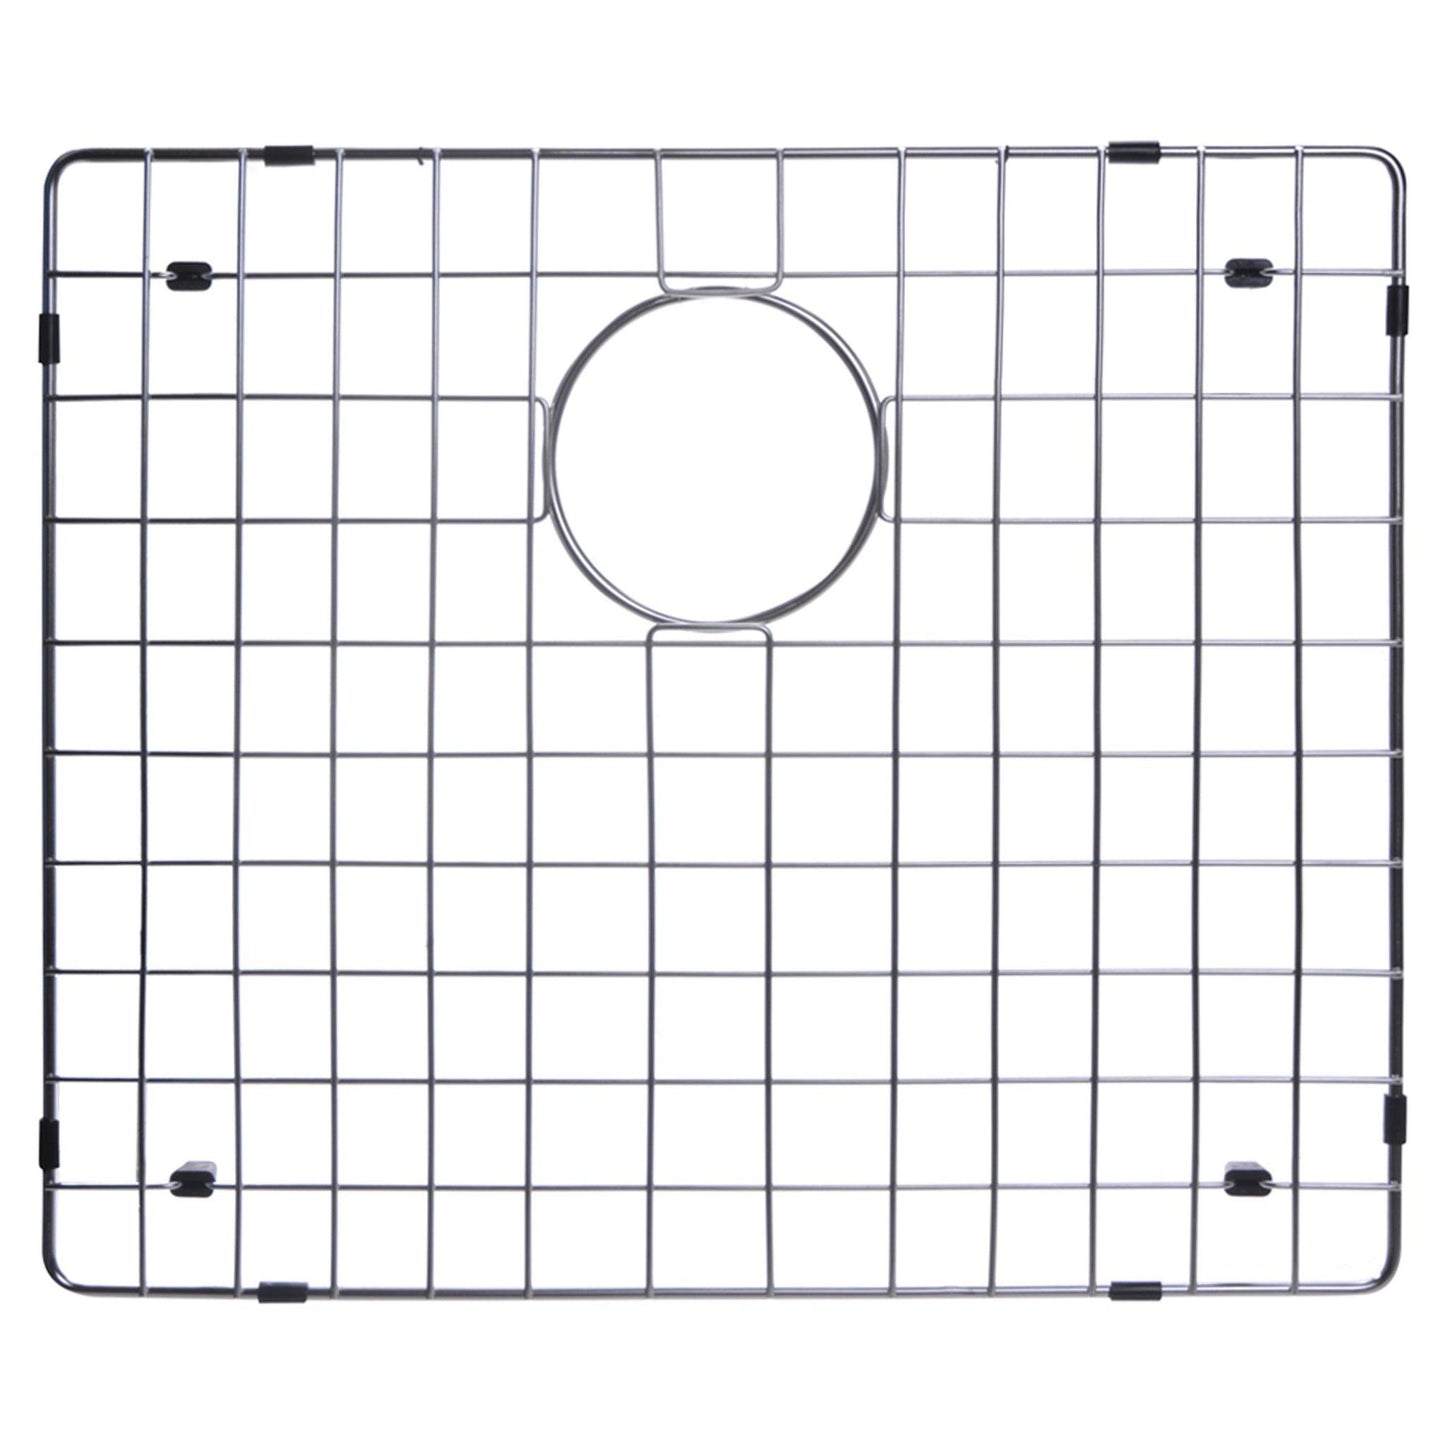 Water Creation Zero Radius Single Bowl Stainless Steel Hand Made Undermount 23 Inch X 20 Inch Sink With Drain, Strainer, And Bottom Grid